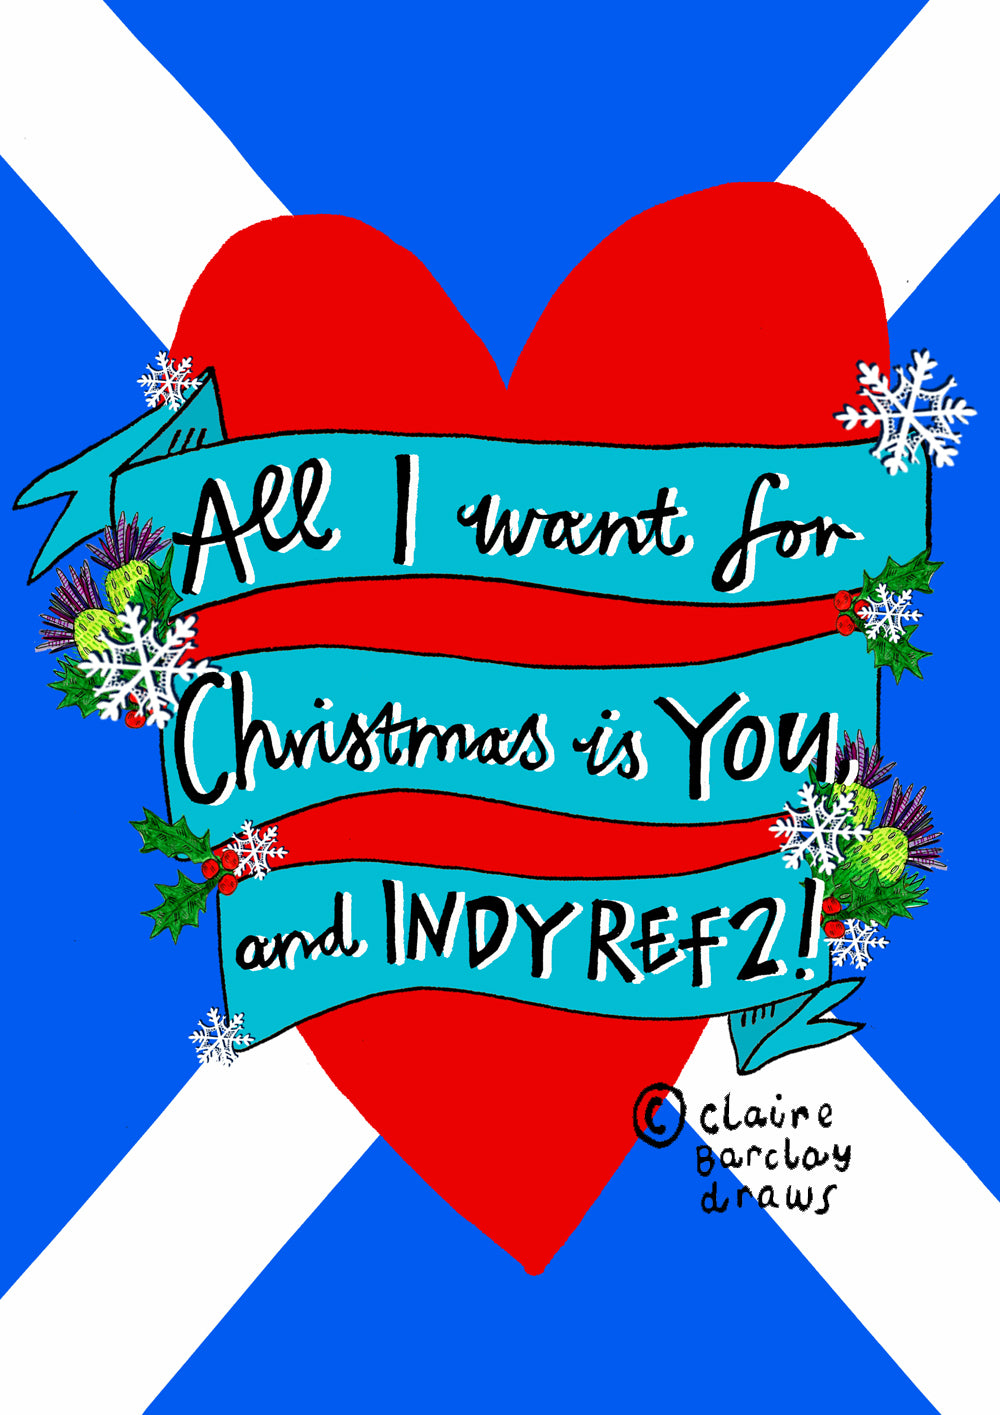 'All I want for Christmas is YOUU and INDY REF 2!' Xmas Card